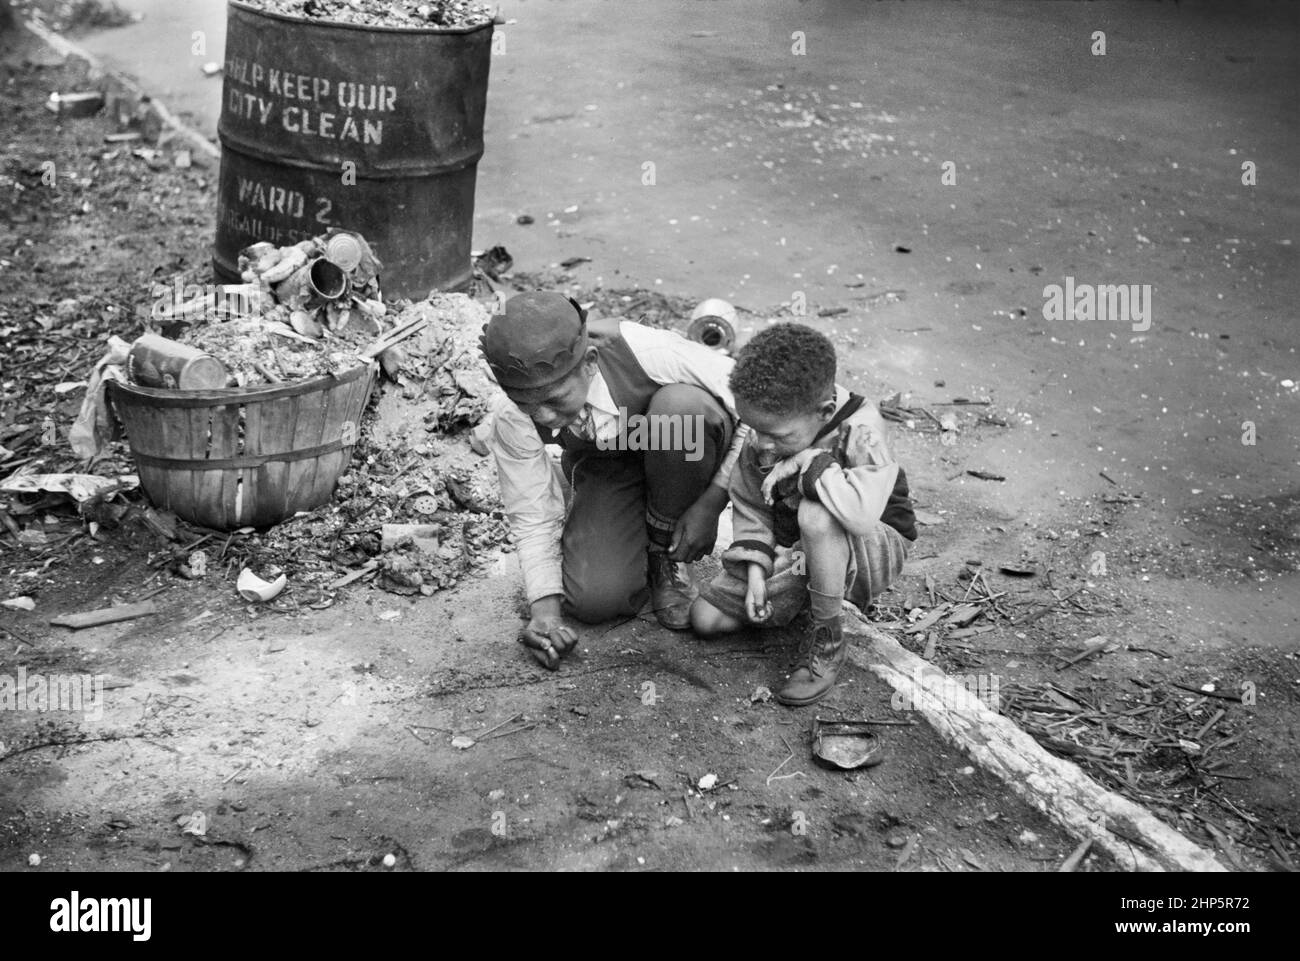 Two Boys playing on Street, Black Belt, Chicago, Illinois, USA, Edwin Rosskam, U.S. Office of War Information/U.S. Farm Security Administration, April 1941 Stock Photo